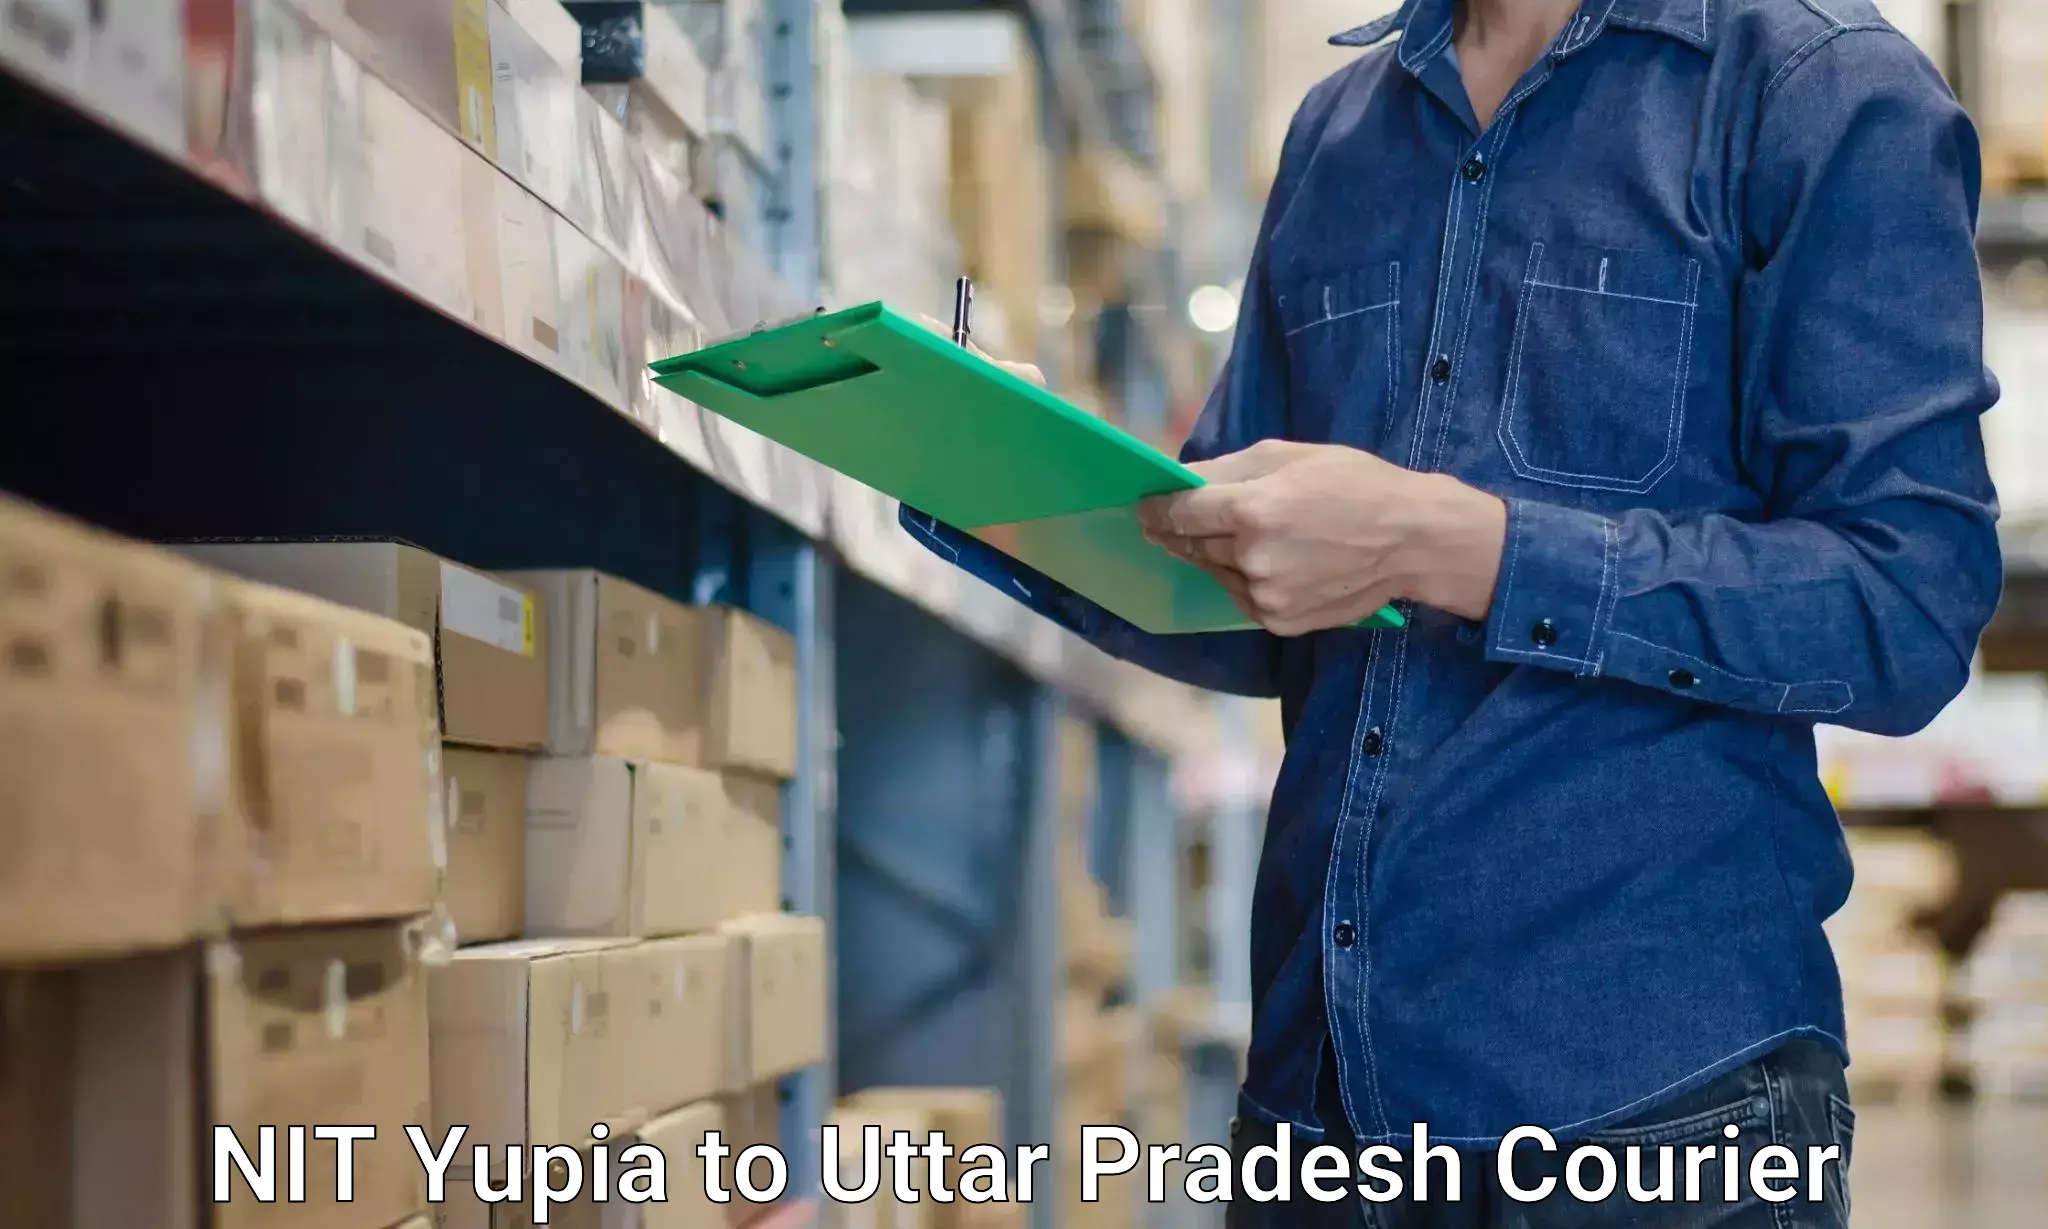 Trusted relocation experts in NIT Yupia to Kirauli